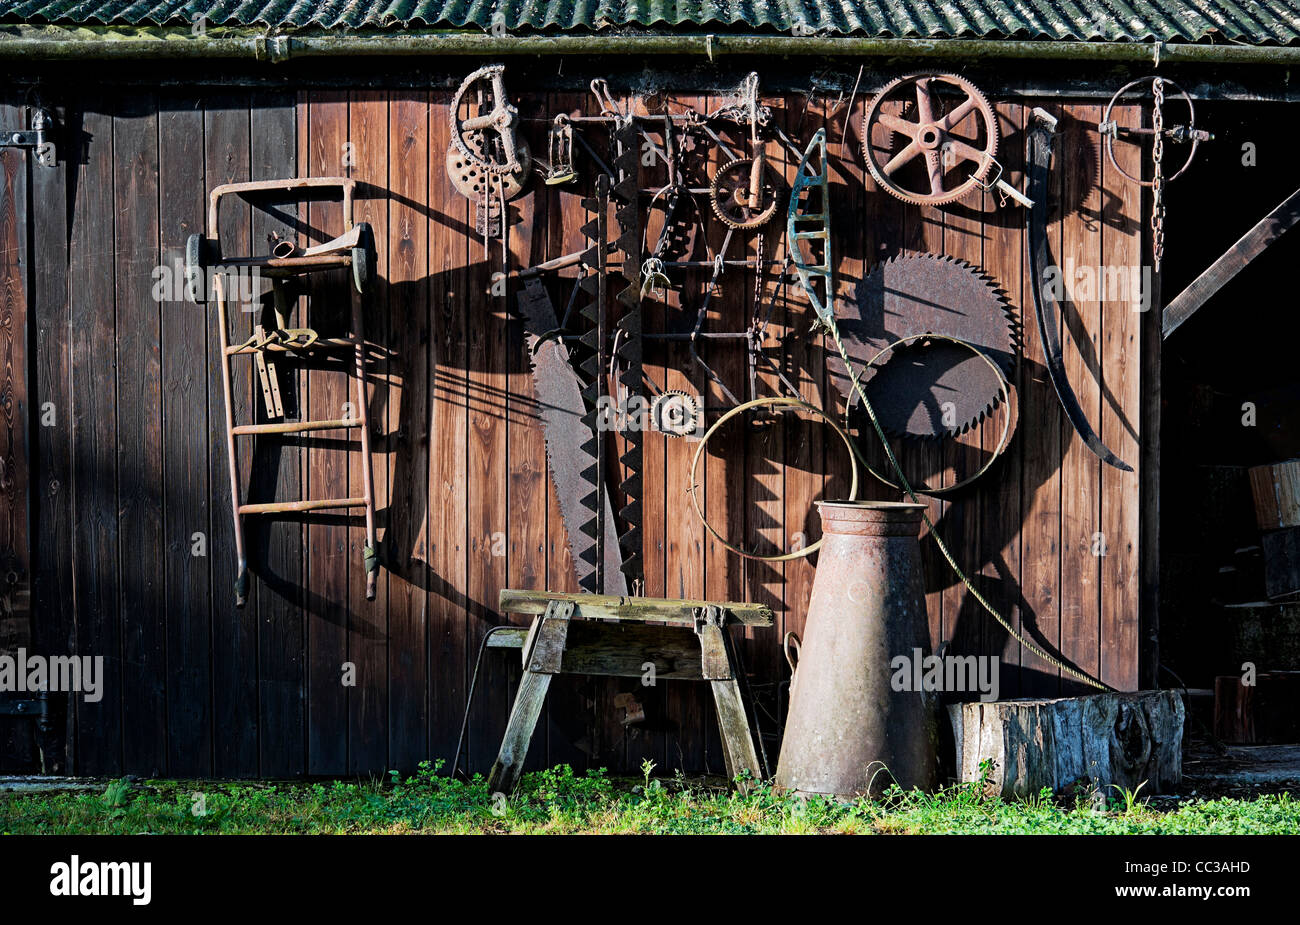 Wooden shed with rusty old tools in side lighting Stock Photo